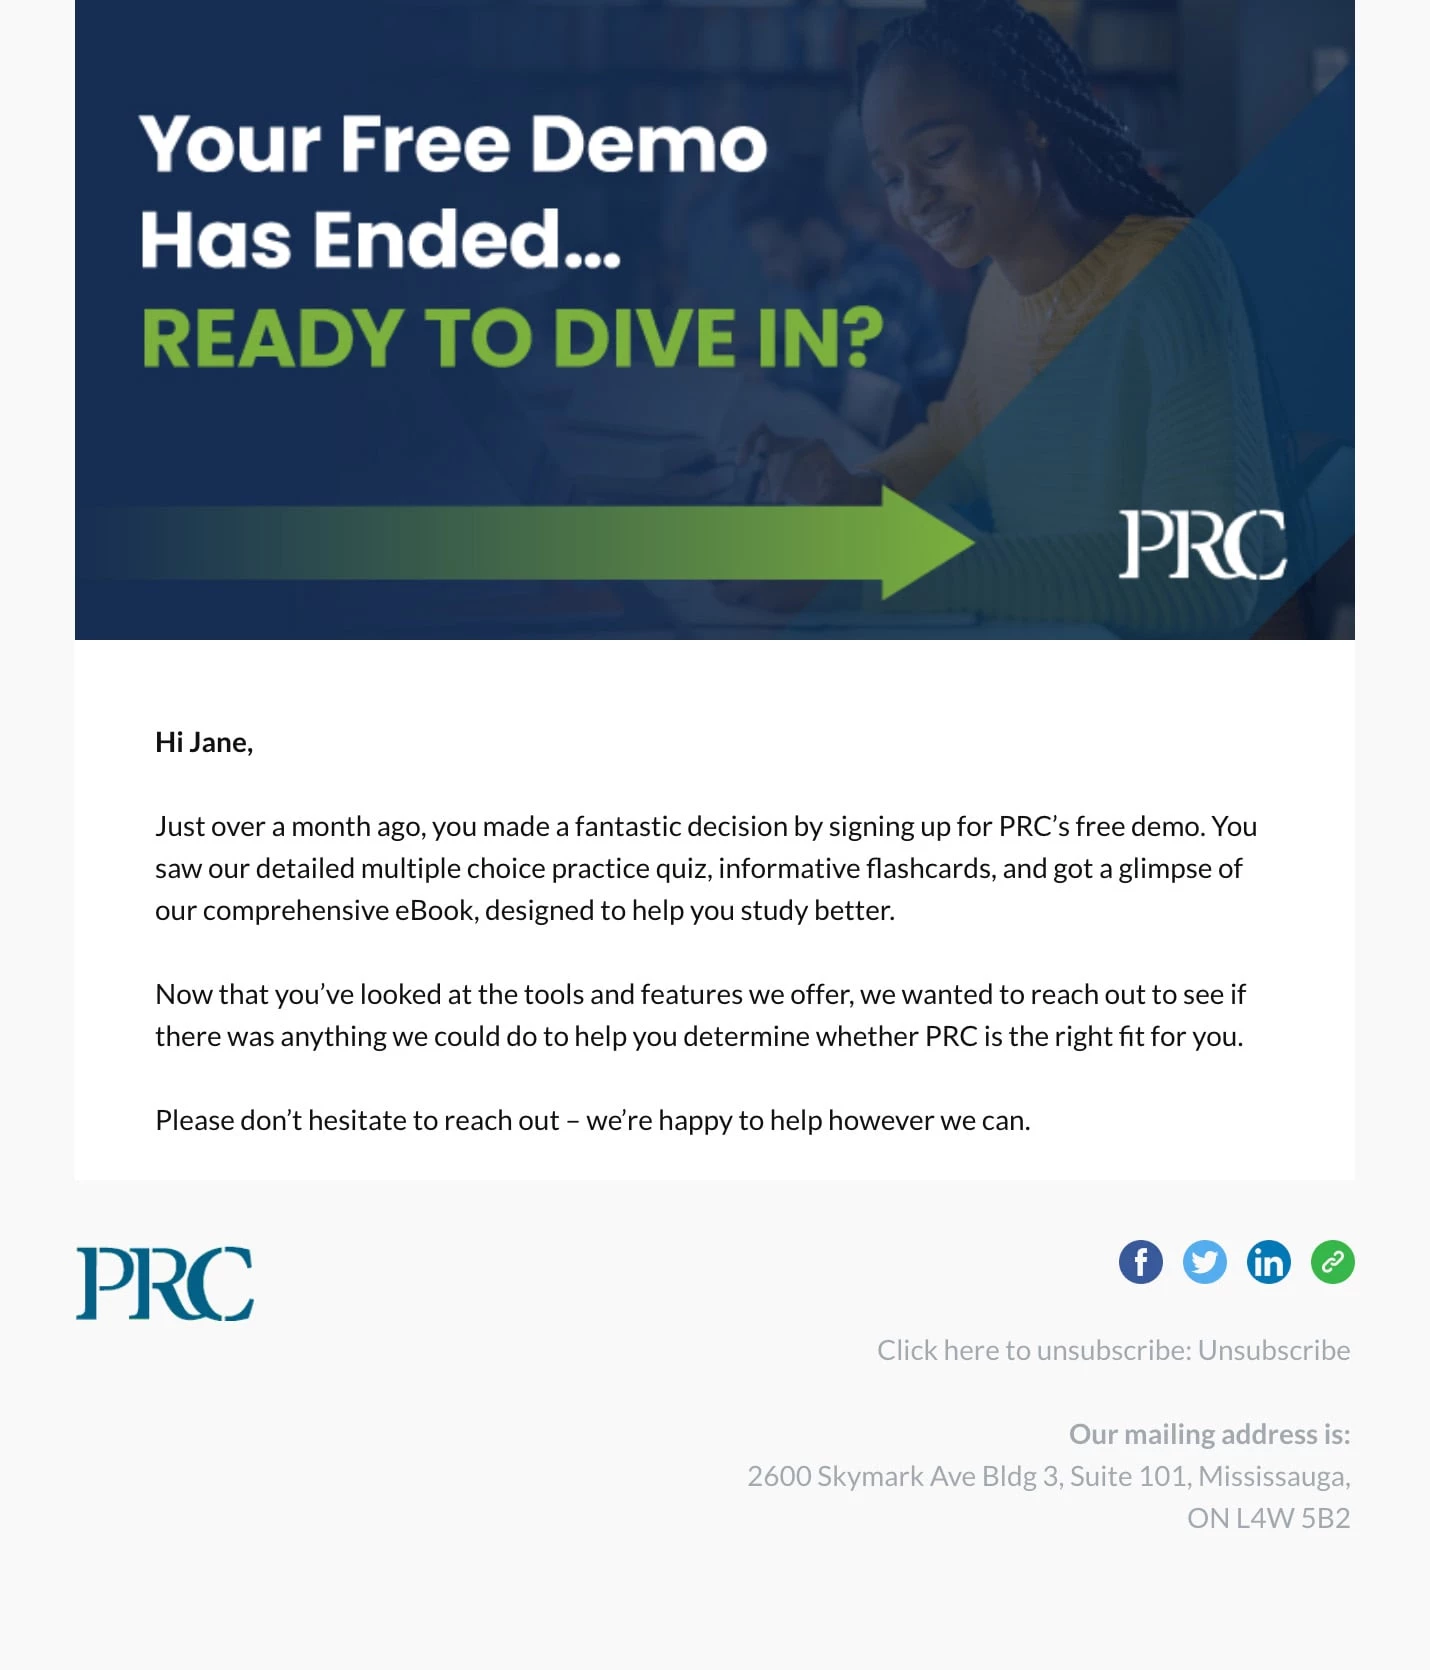 A trial expiration email example from PRC.